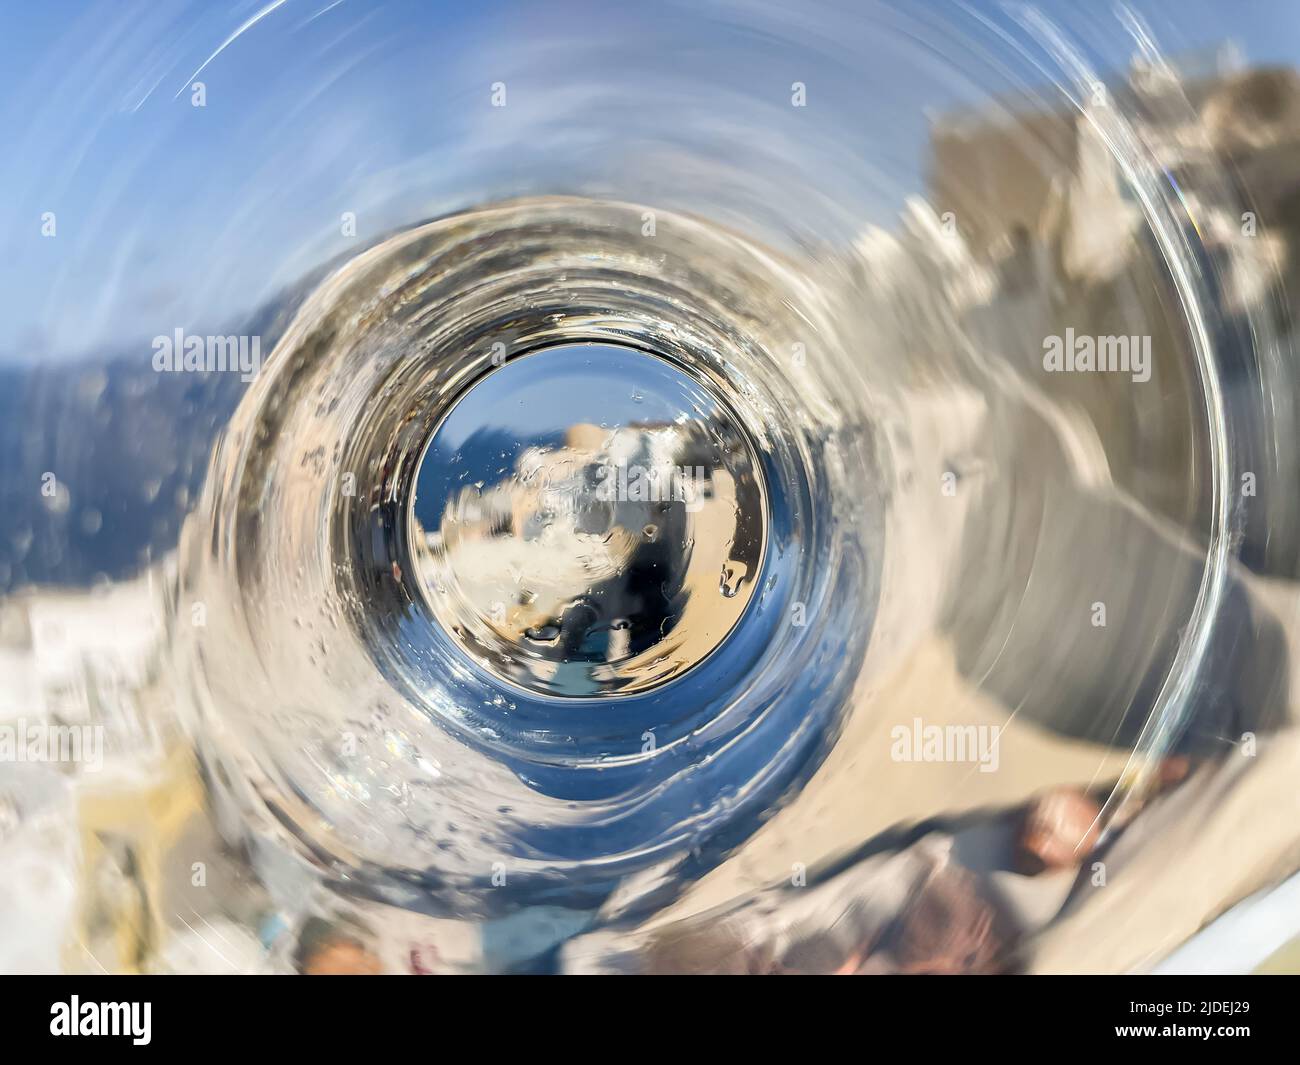 An unusual view of iconic Oia on Santorini island, seen through the bottom of a water glass Stock Photo